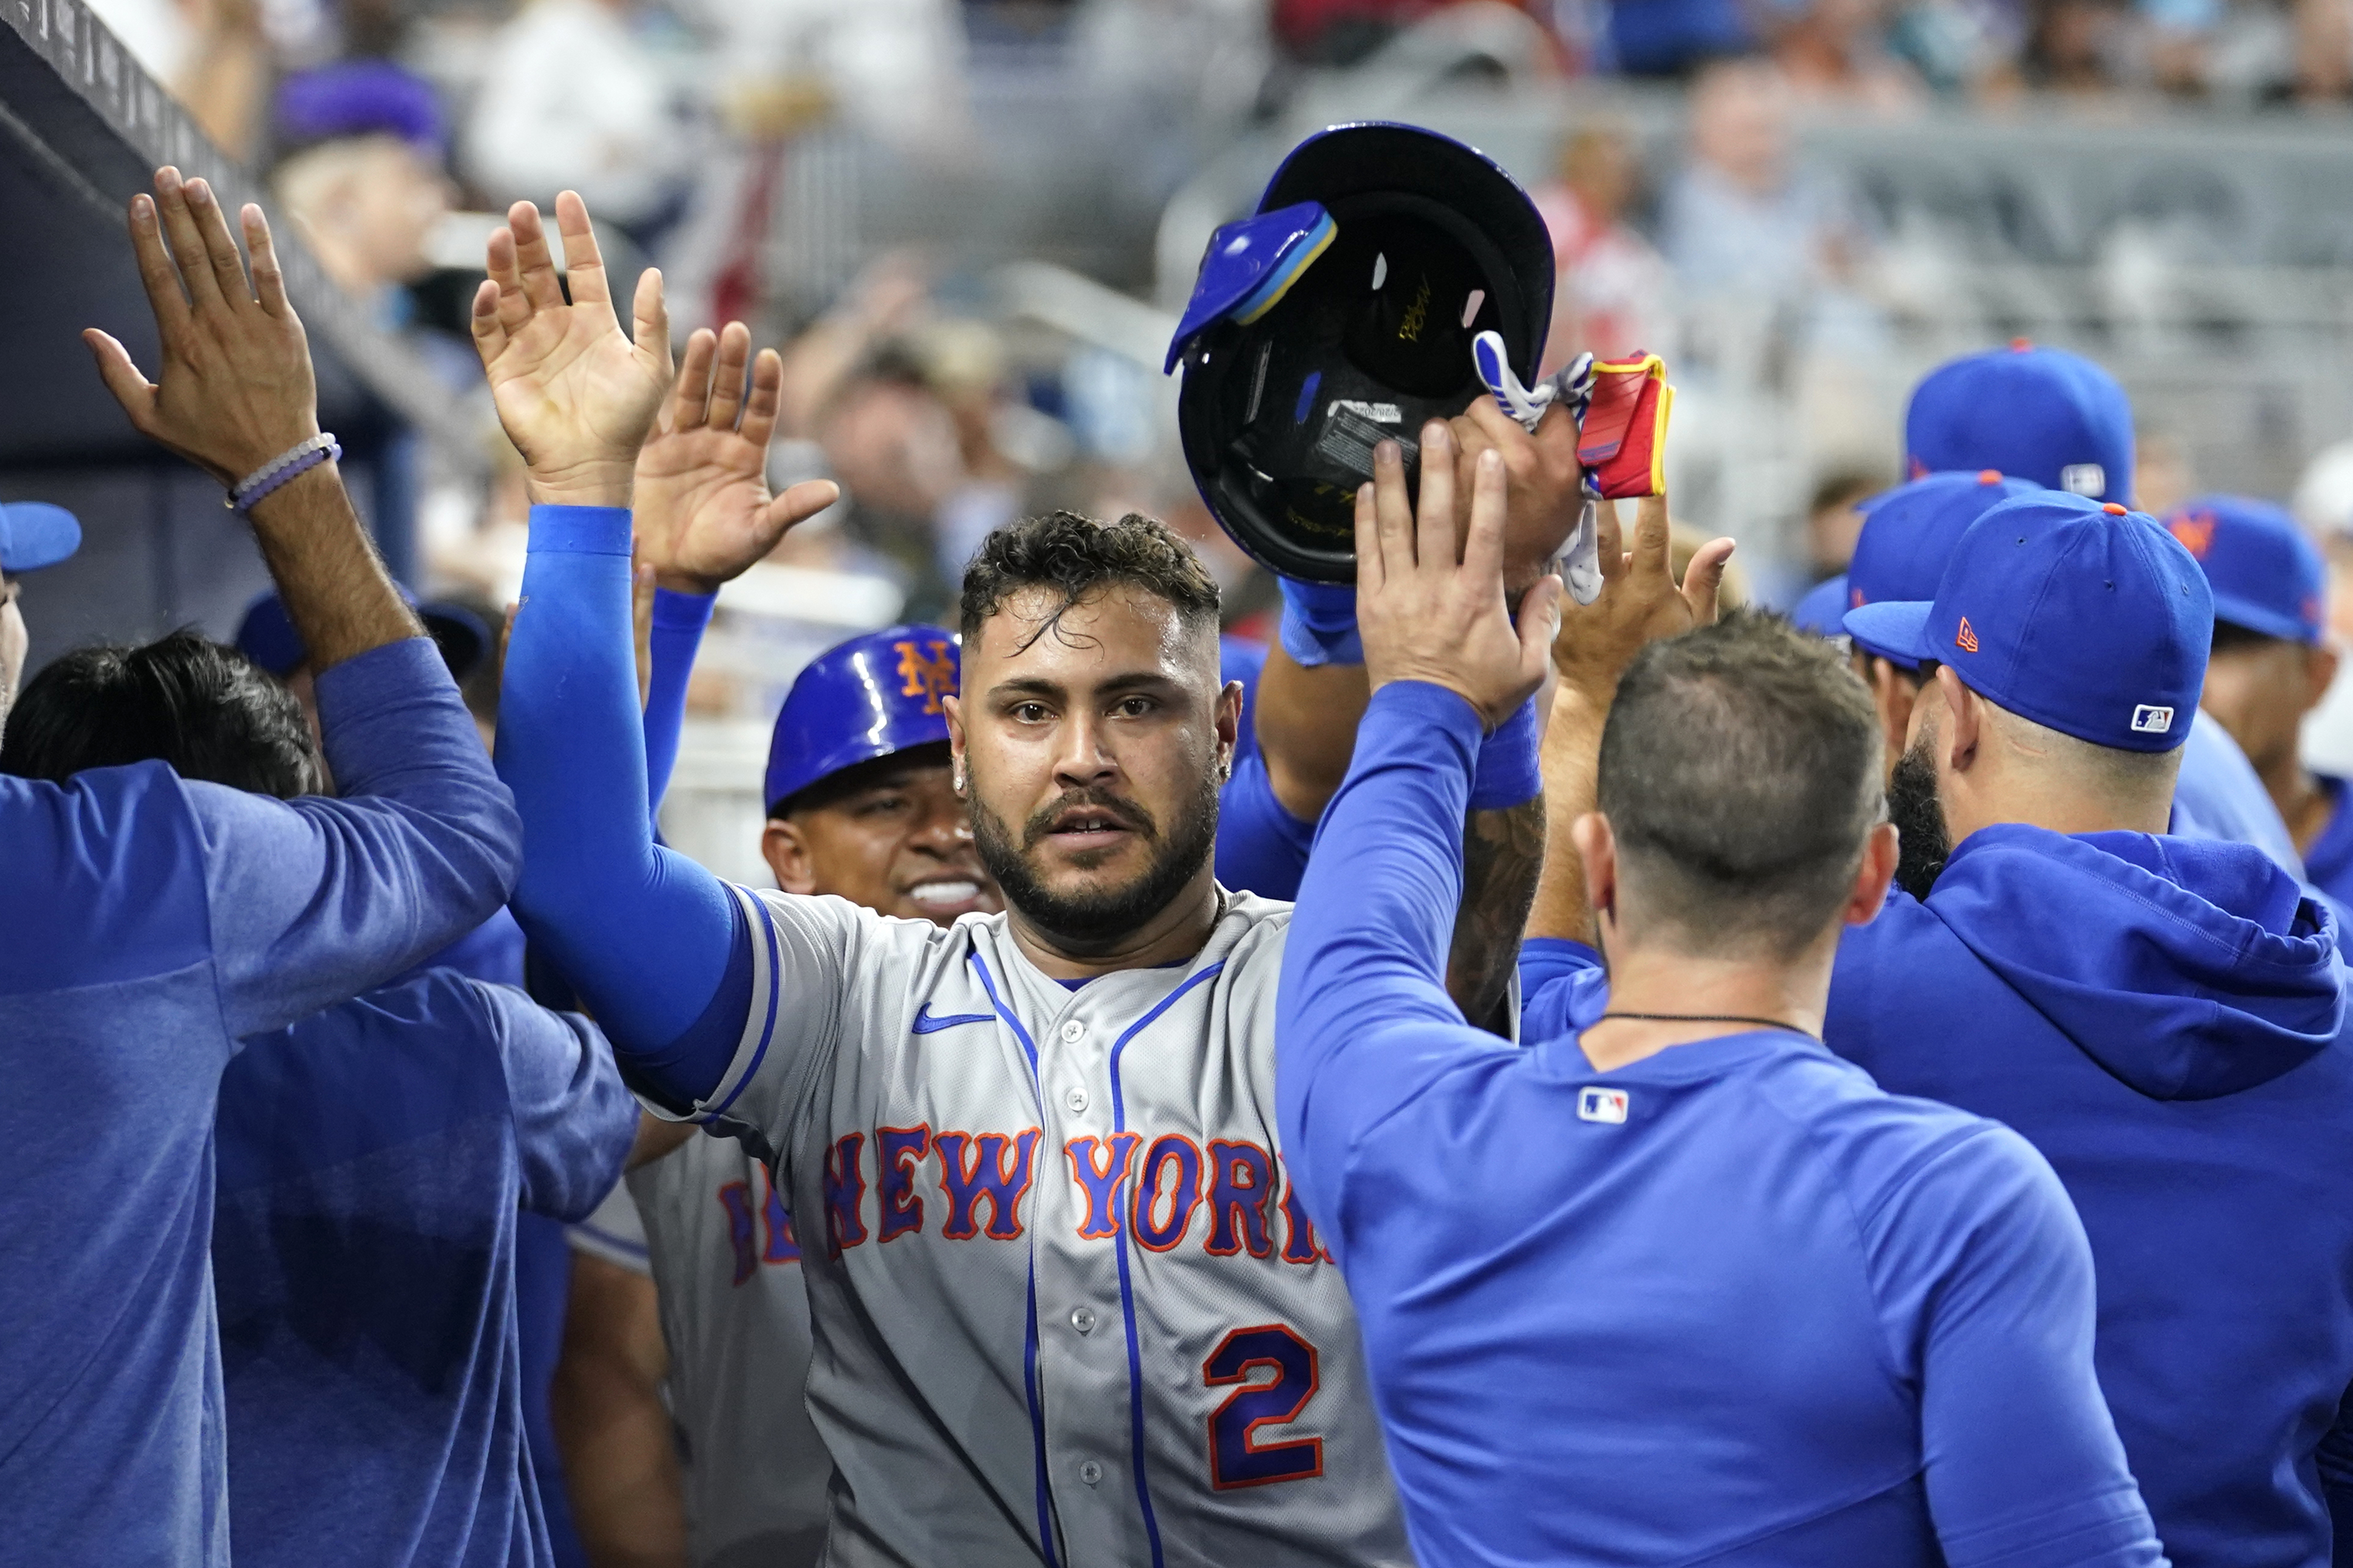 Omar Narvez of the New York Mets celebrates in the dugout after scoring on Brandon Nimmo's double against the Miami Marlins, Thursday, March 30, 2023. (AP Photo/Lynne Sladky)